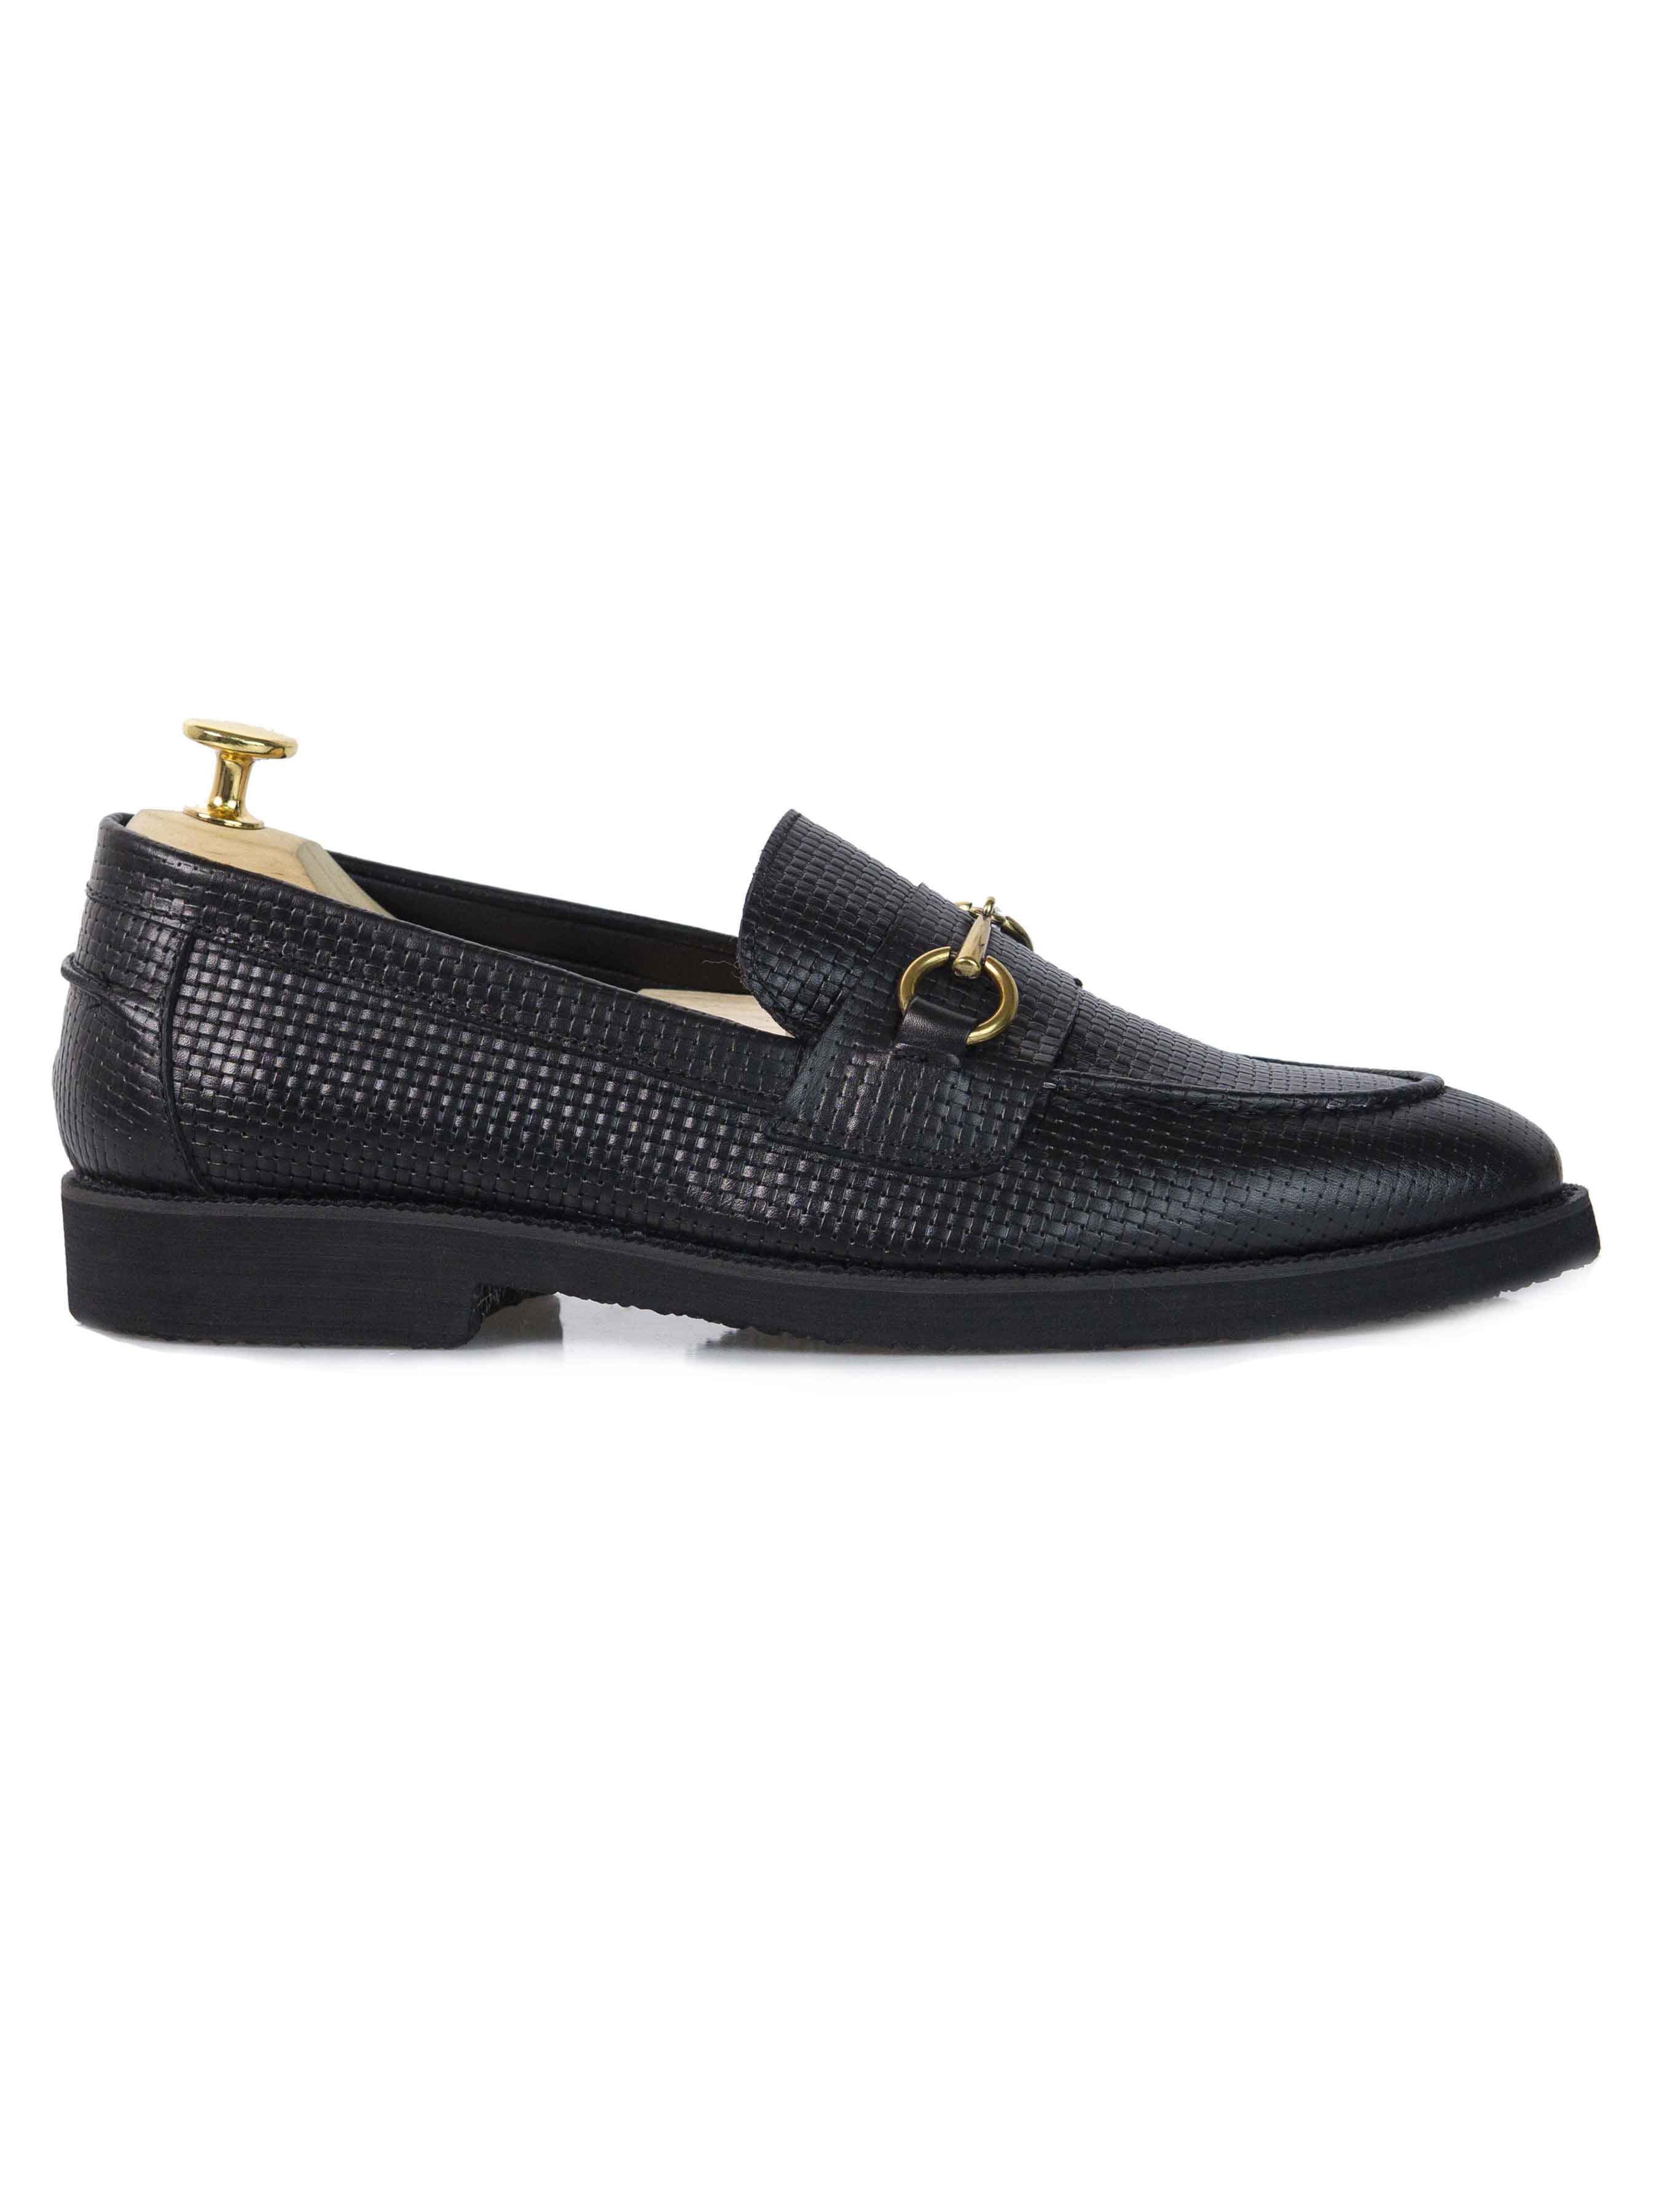 Penny Loafer Horsebit Buckle - Black Woven Leather (Crepe Sole)